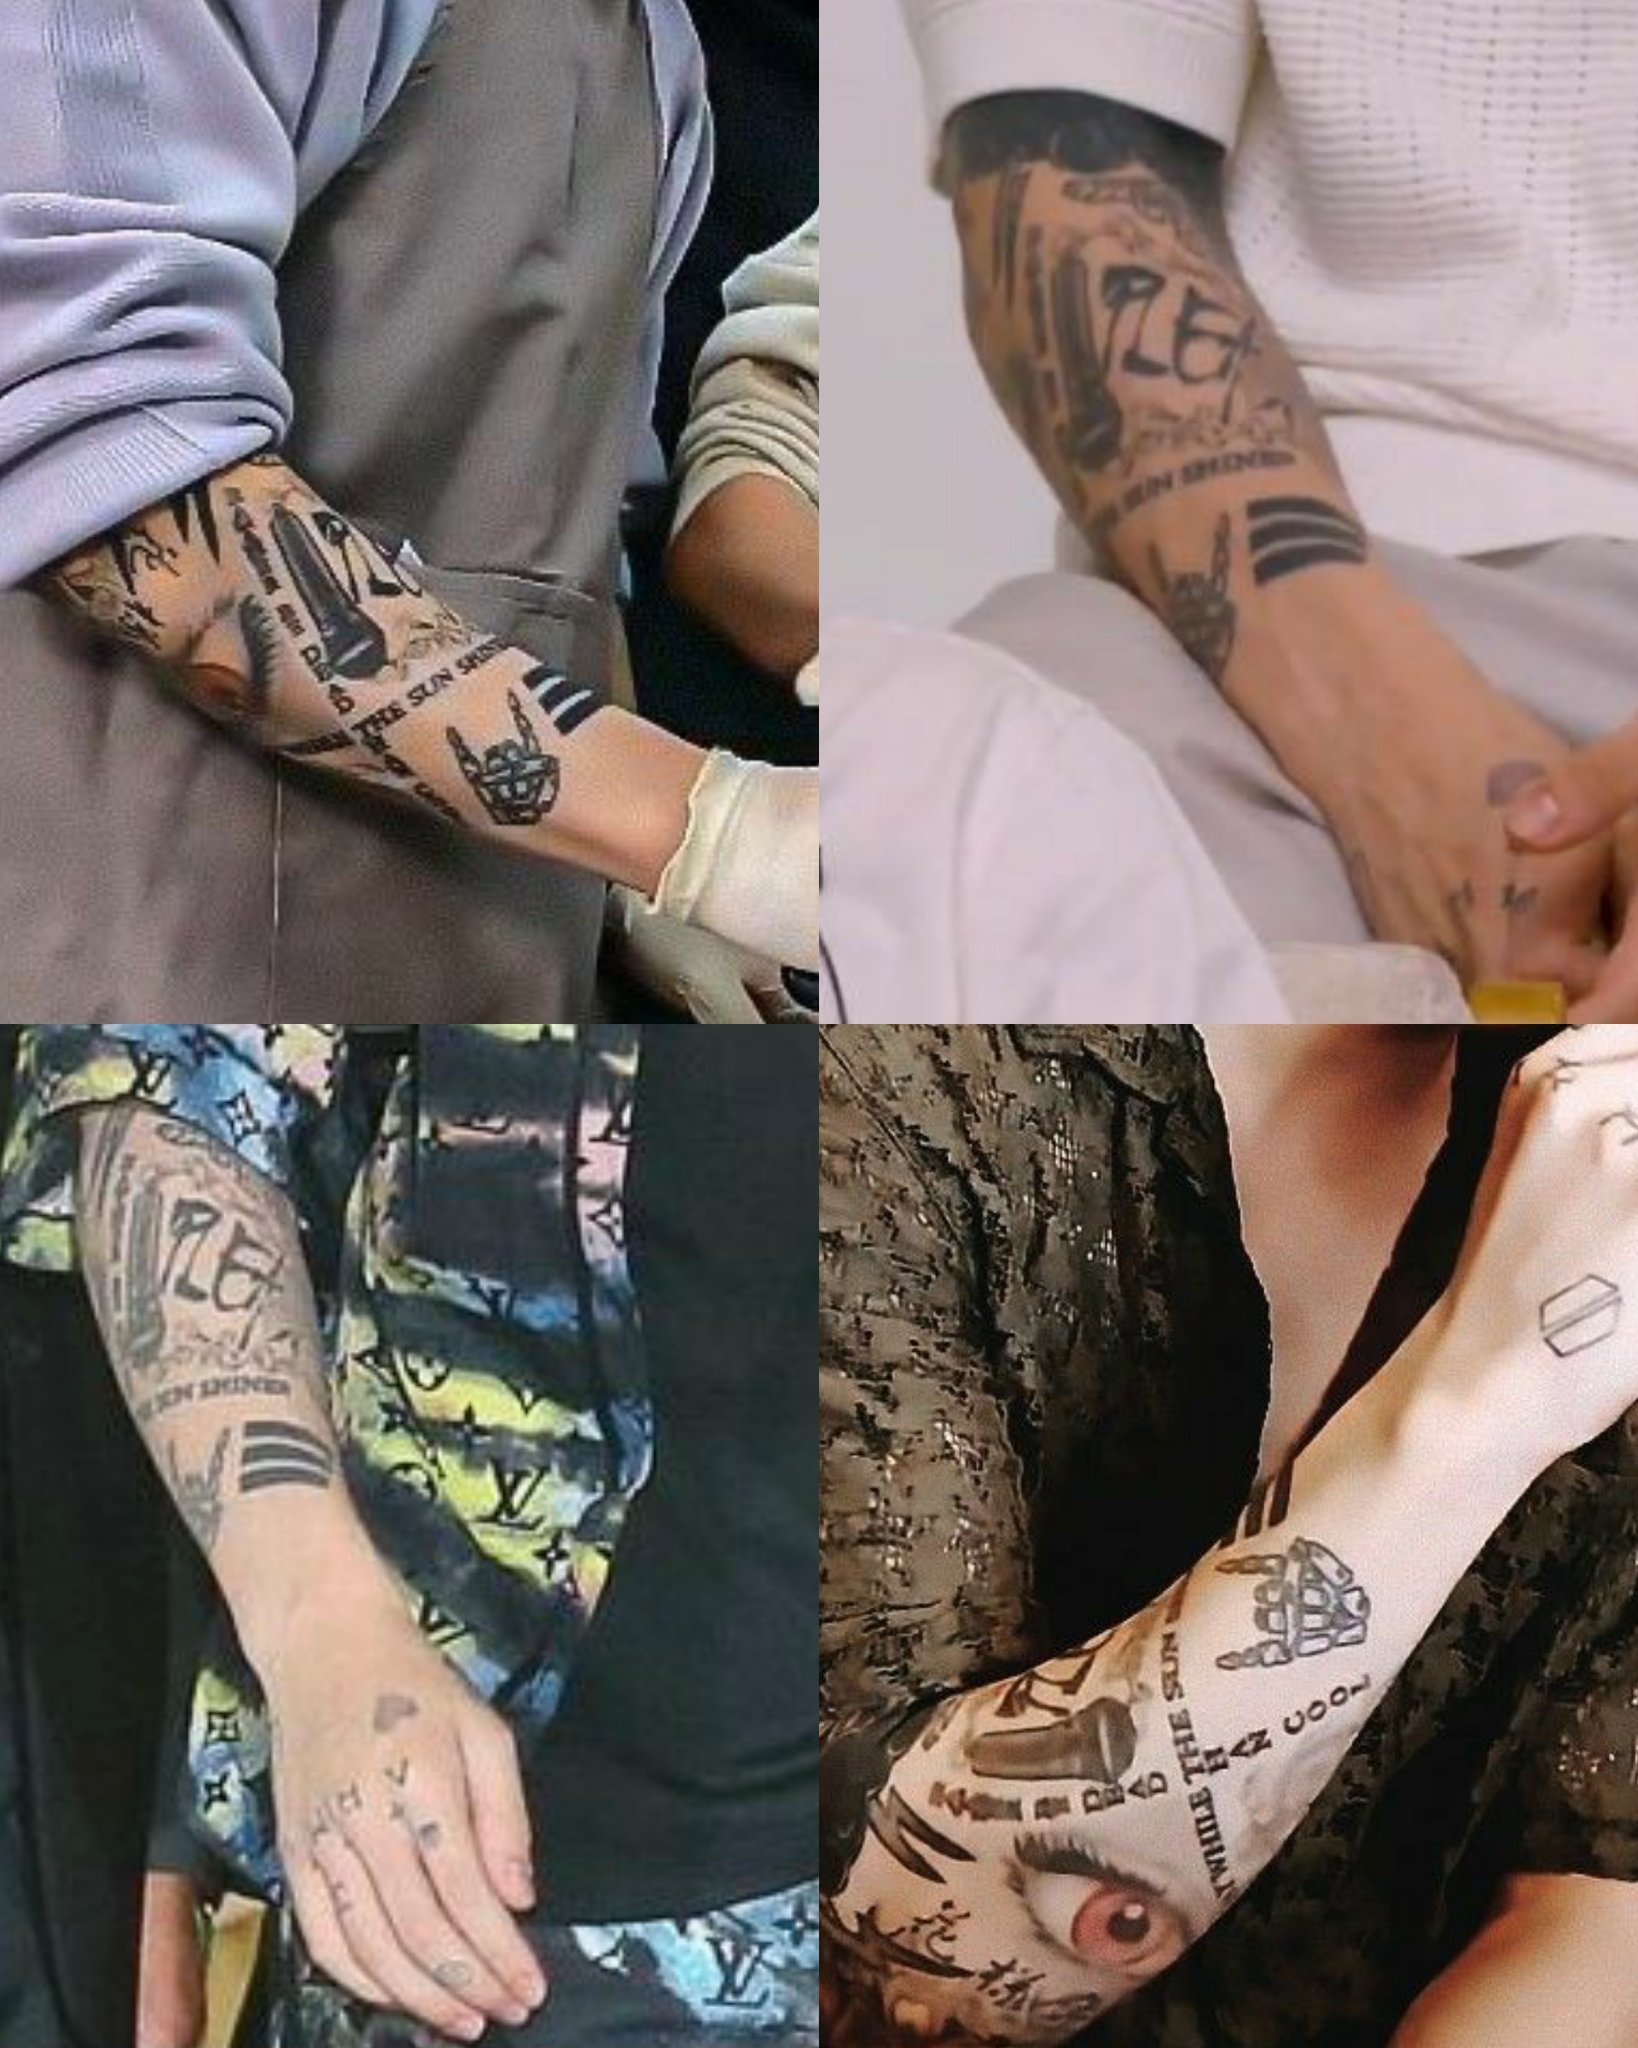 Are Jungkook's tattoos on his arm and hand real or henna? - Quora